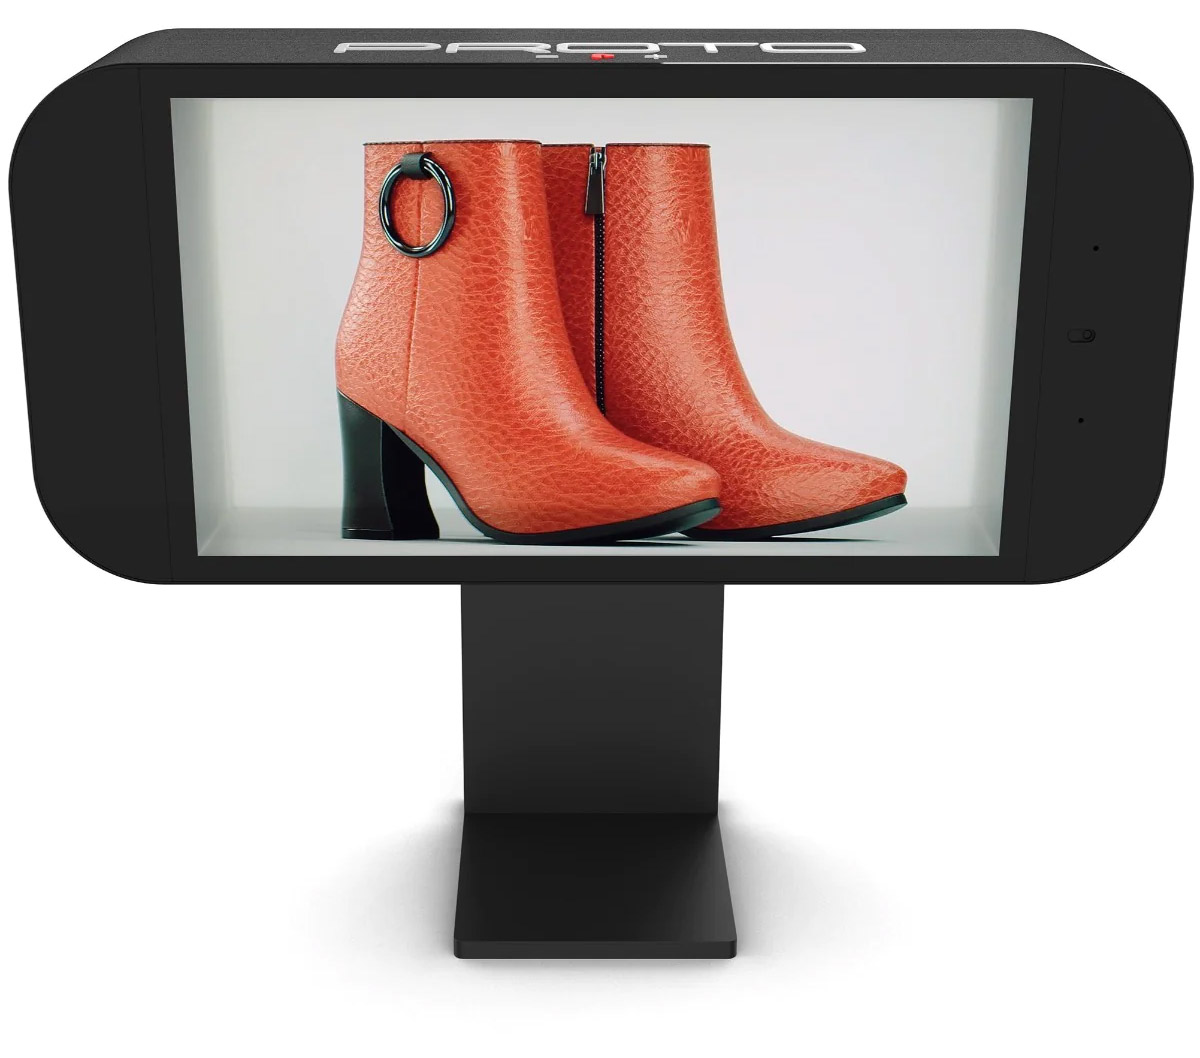 Proto M display with picture of a pair of women's boots.